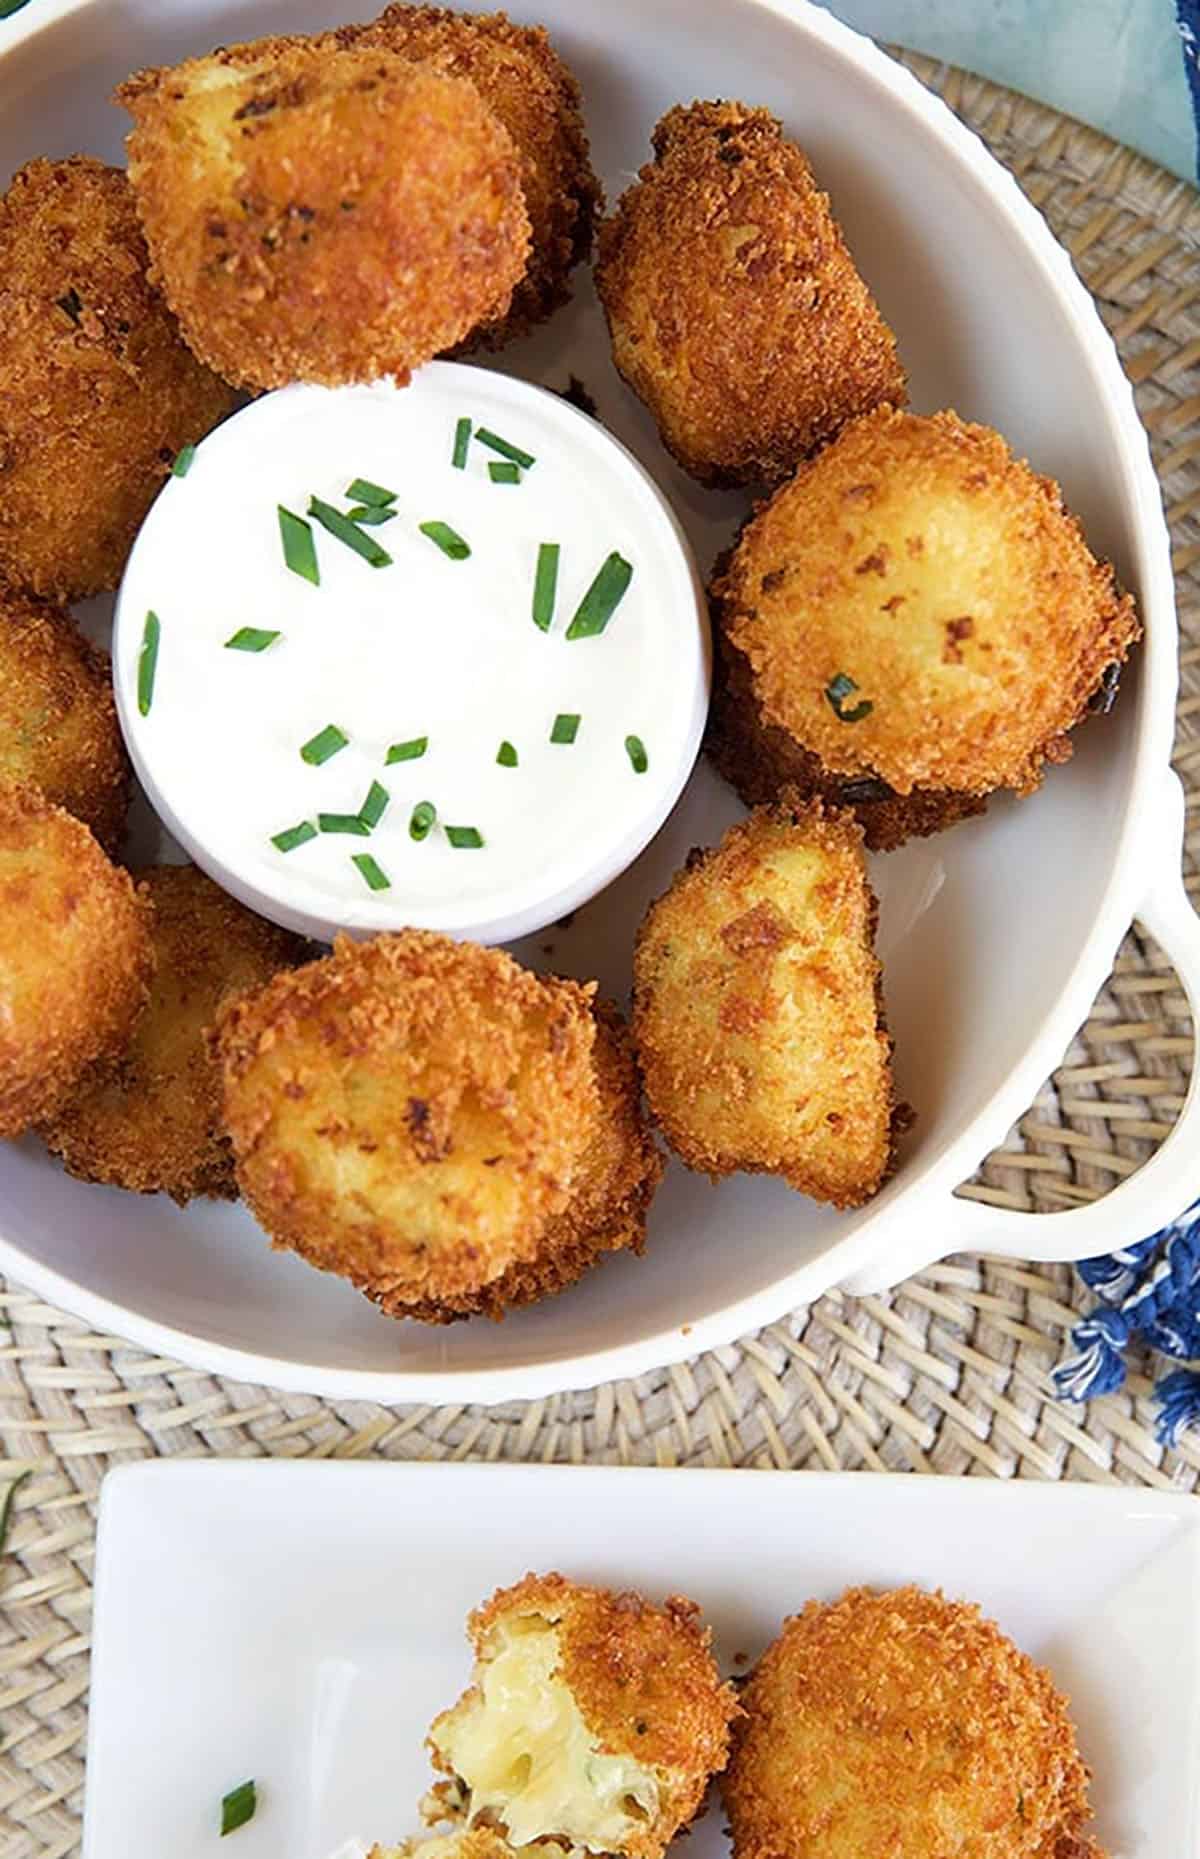 A bowl full of croquettes sits next to a plate with several croquettes.